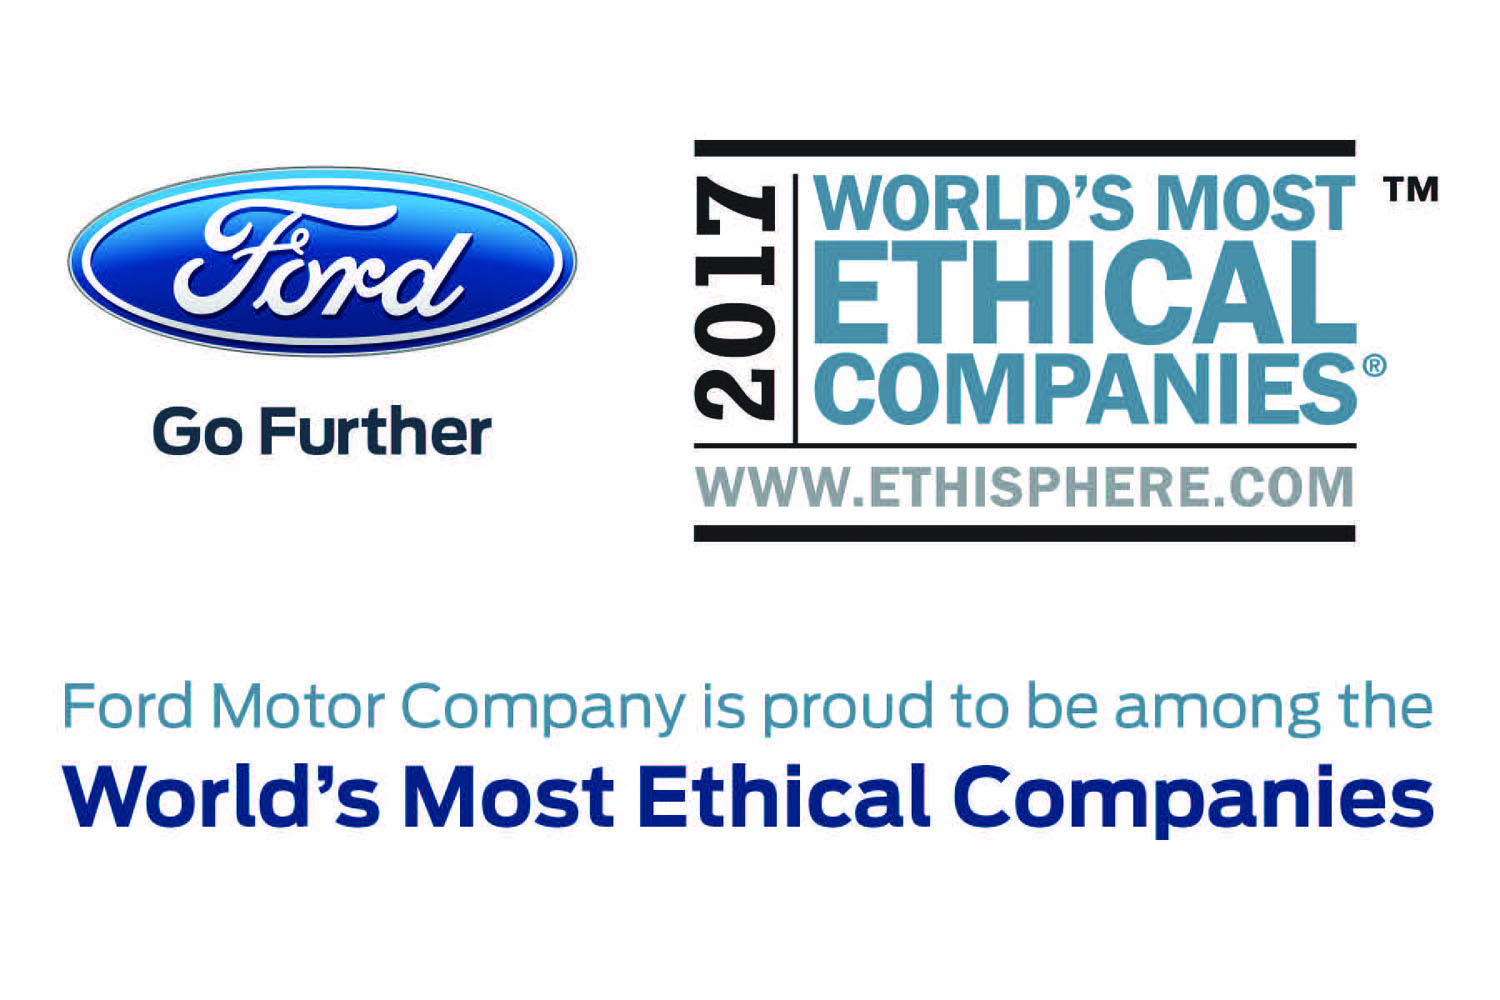 Ford-2017-Worlds-Most-Ethical-Companies.jpg